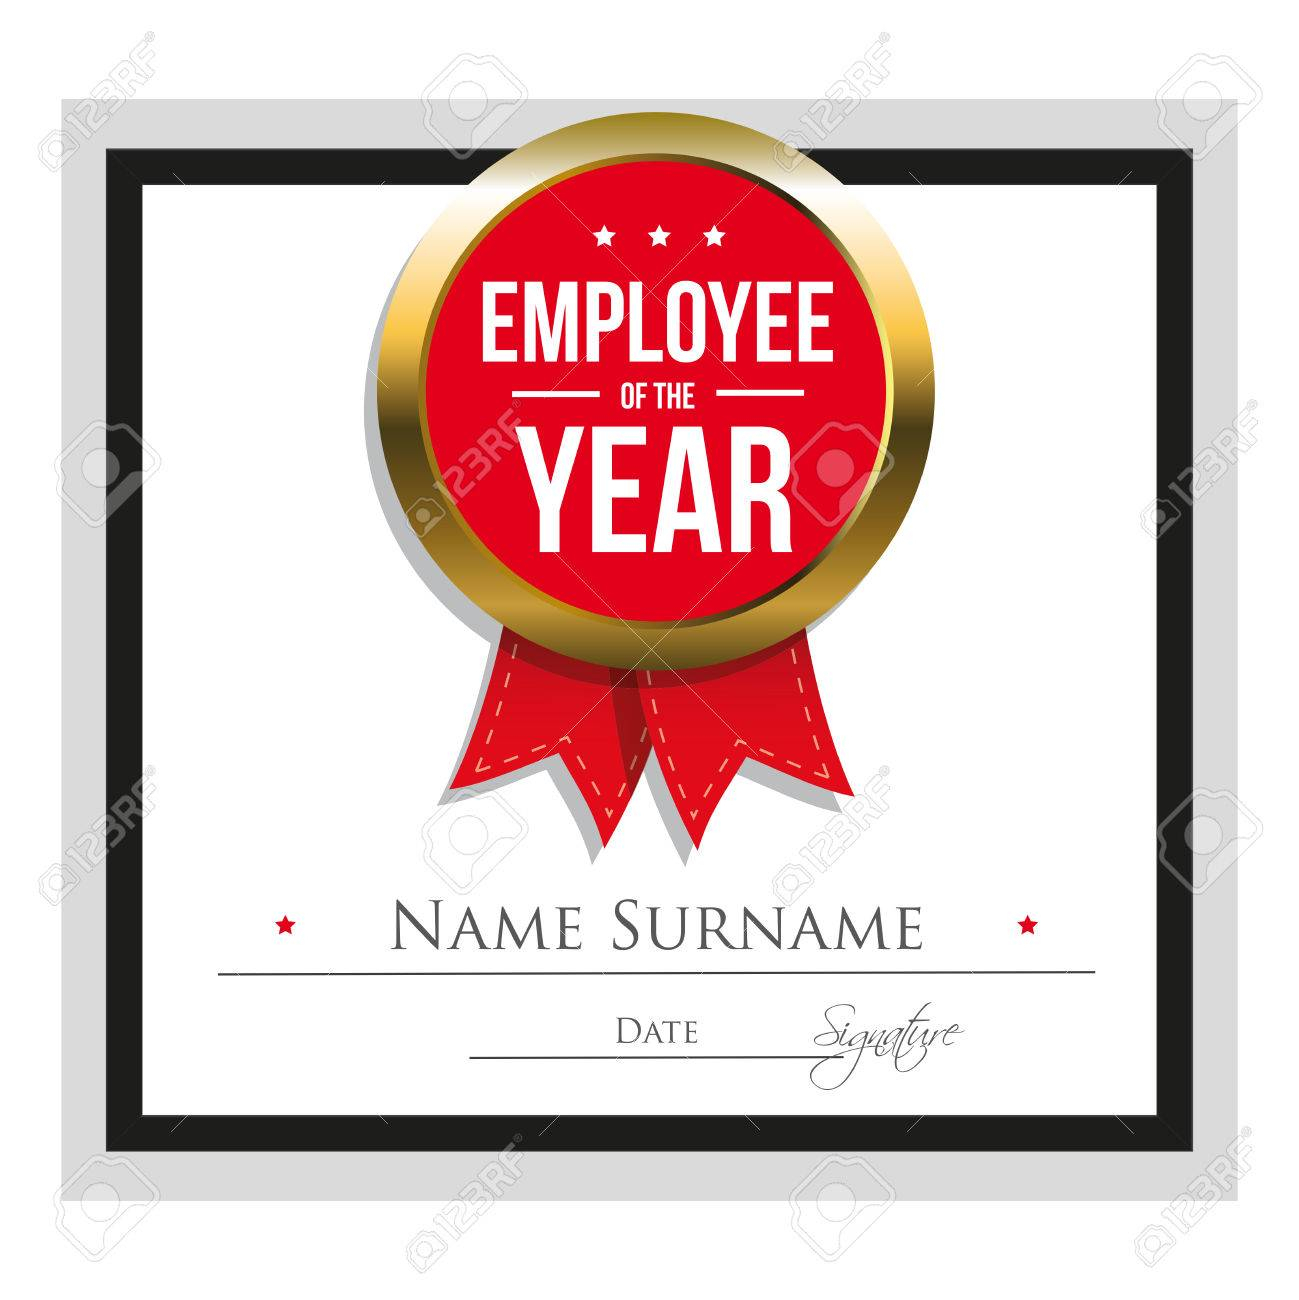 Employee Of The Year Certificate Template Intended For Employee Of The Year Certificate Template Free